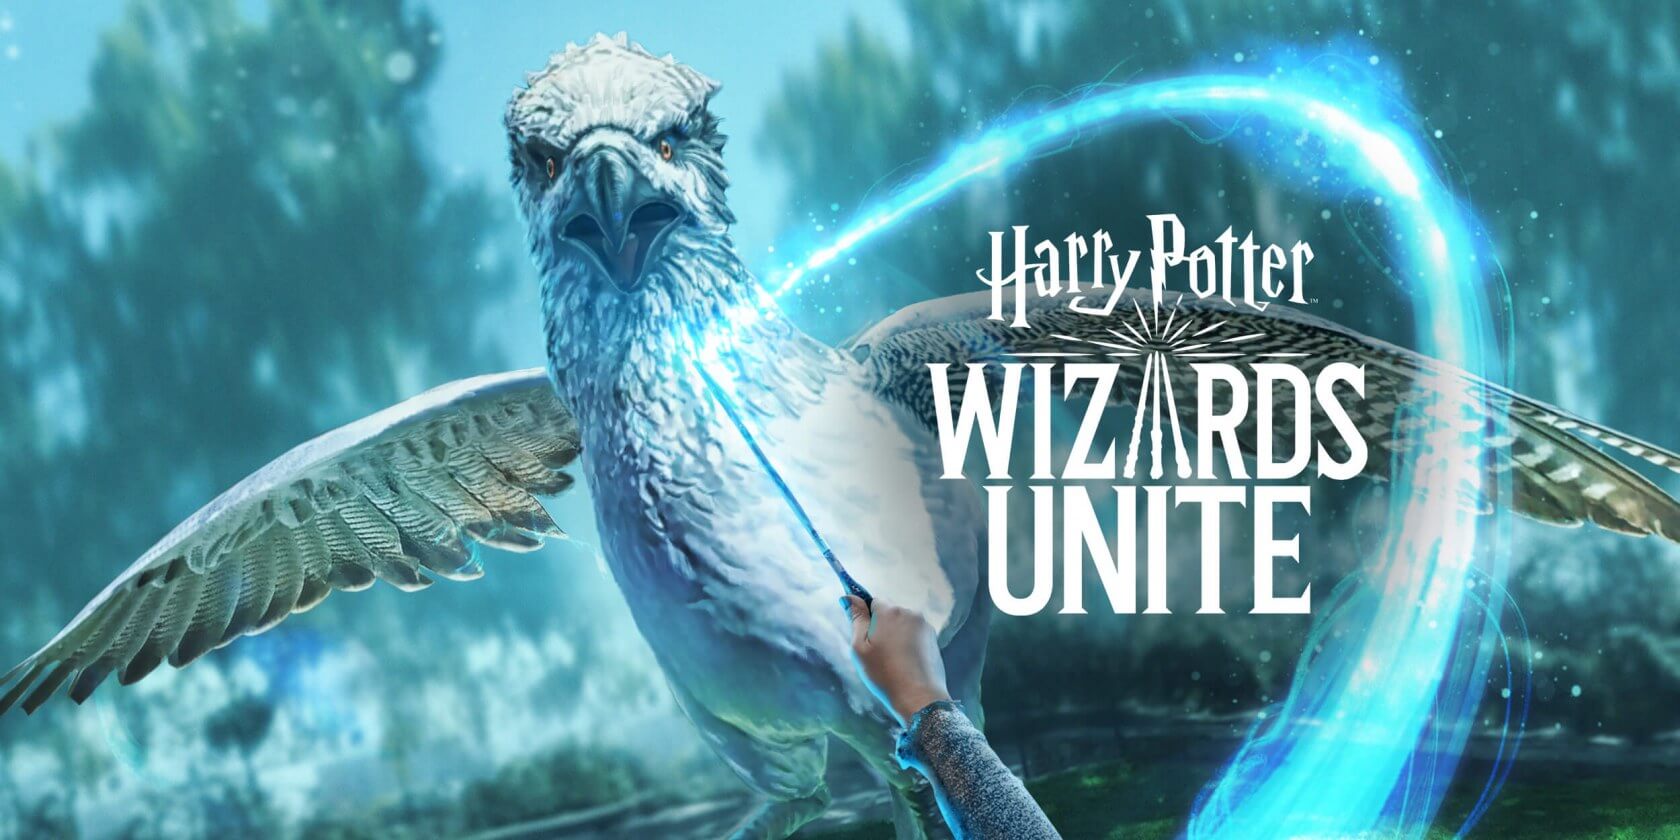 Pokémon Go-like mobile AR title 'Harry Potter: Wizards Unite' launches on iOS and Android